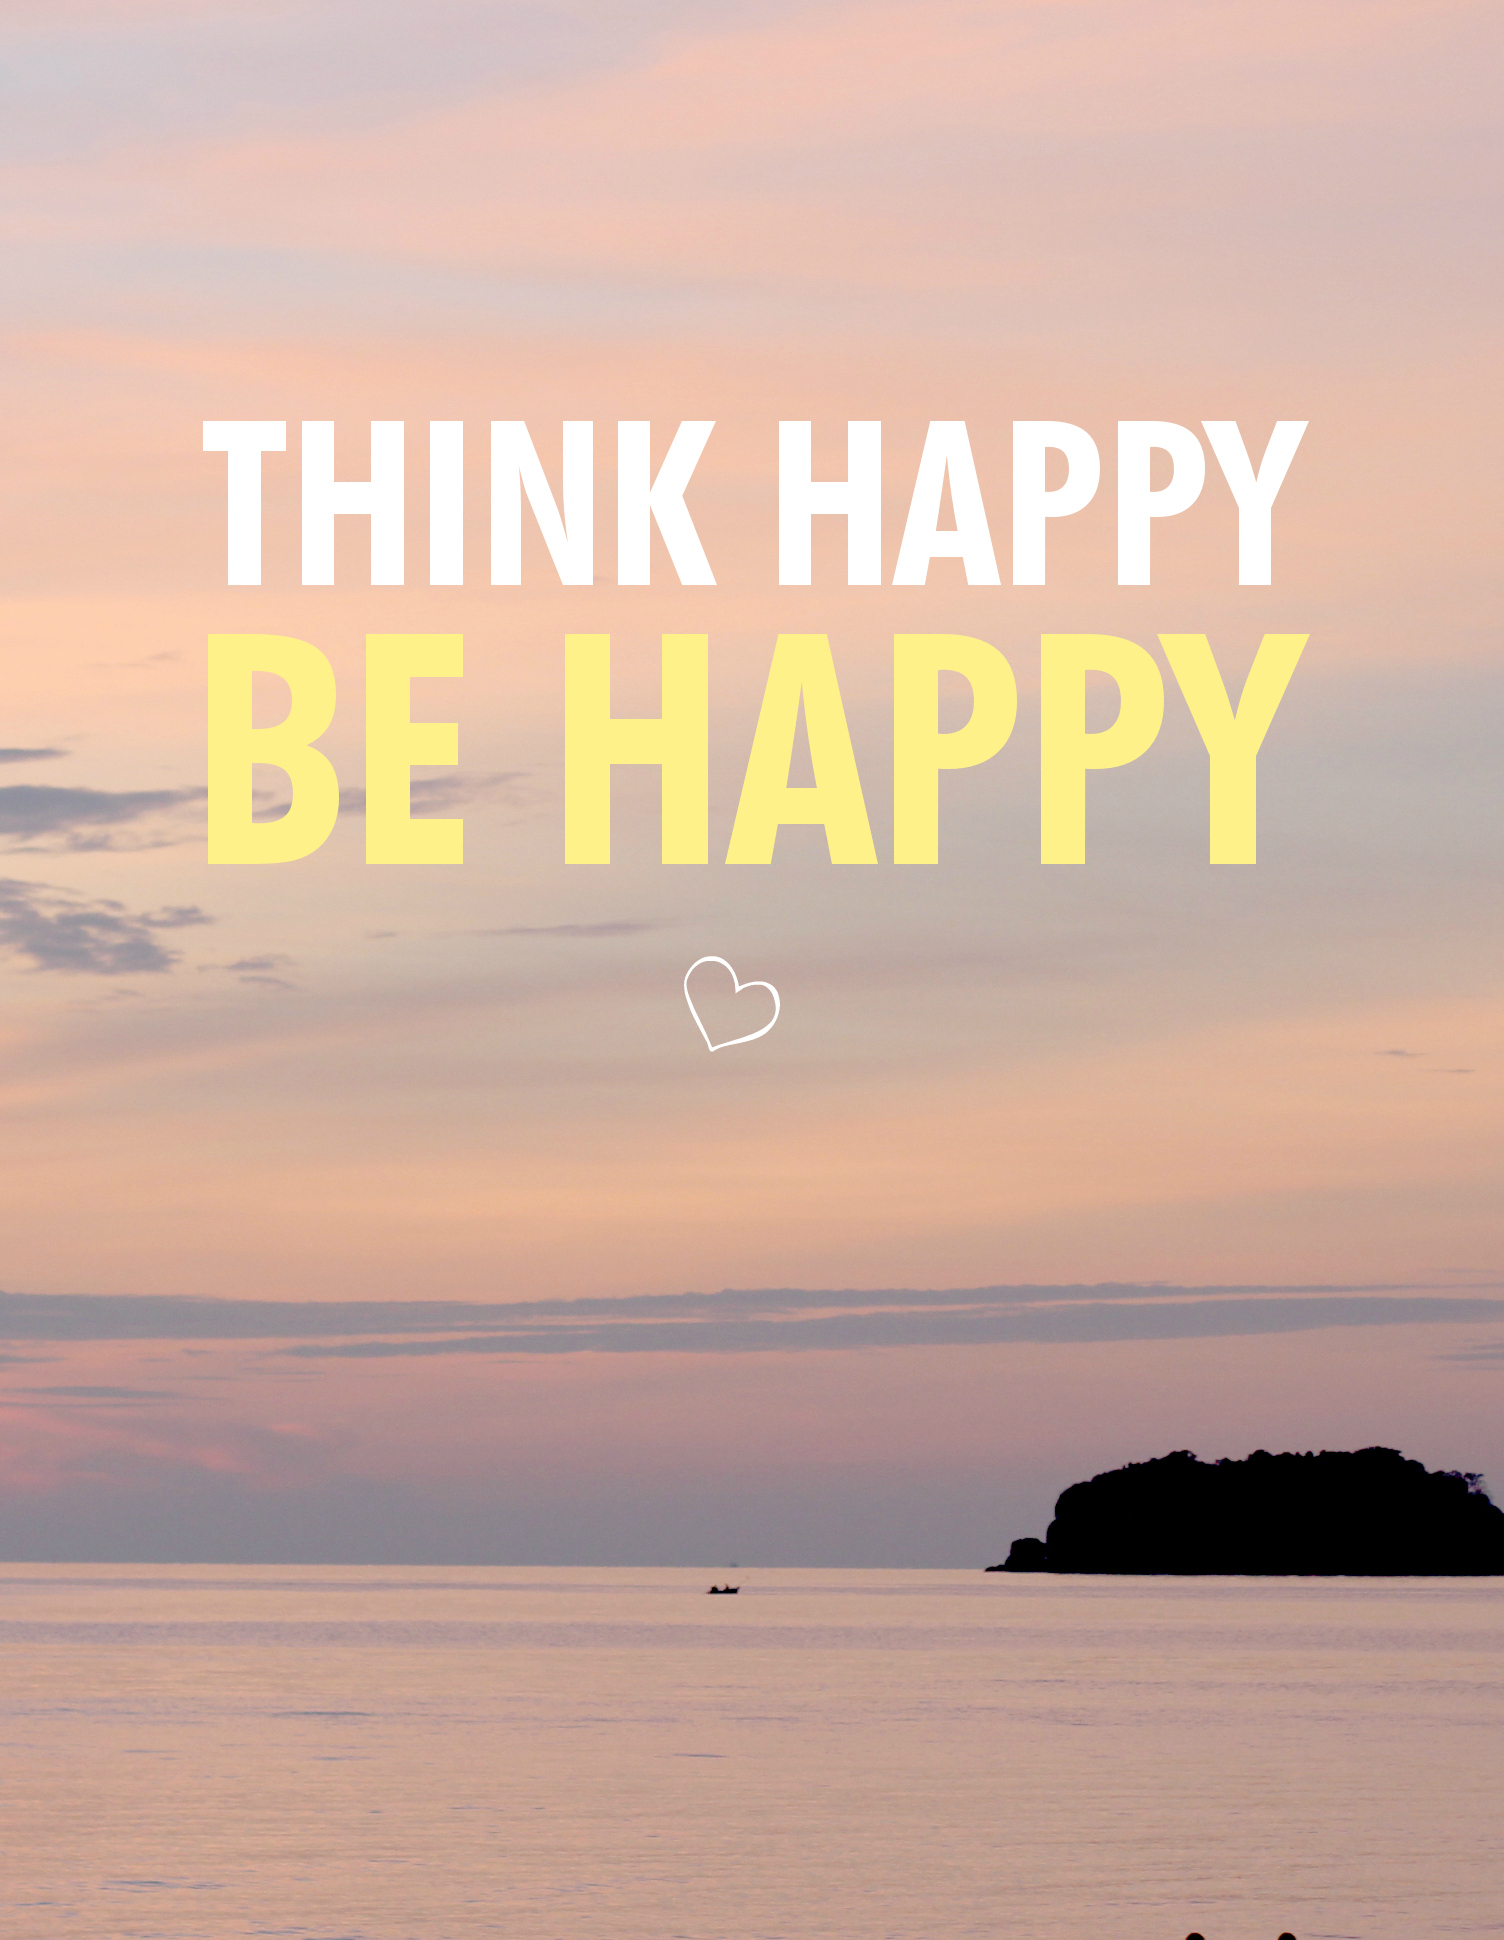 Quote Think Happy Be Happy / www.fanfarella.at